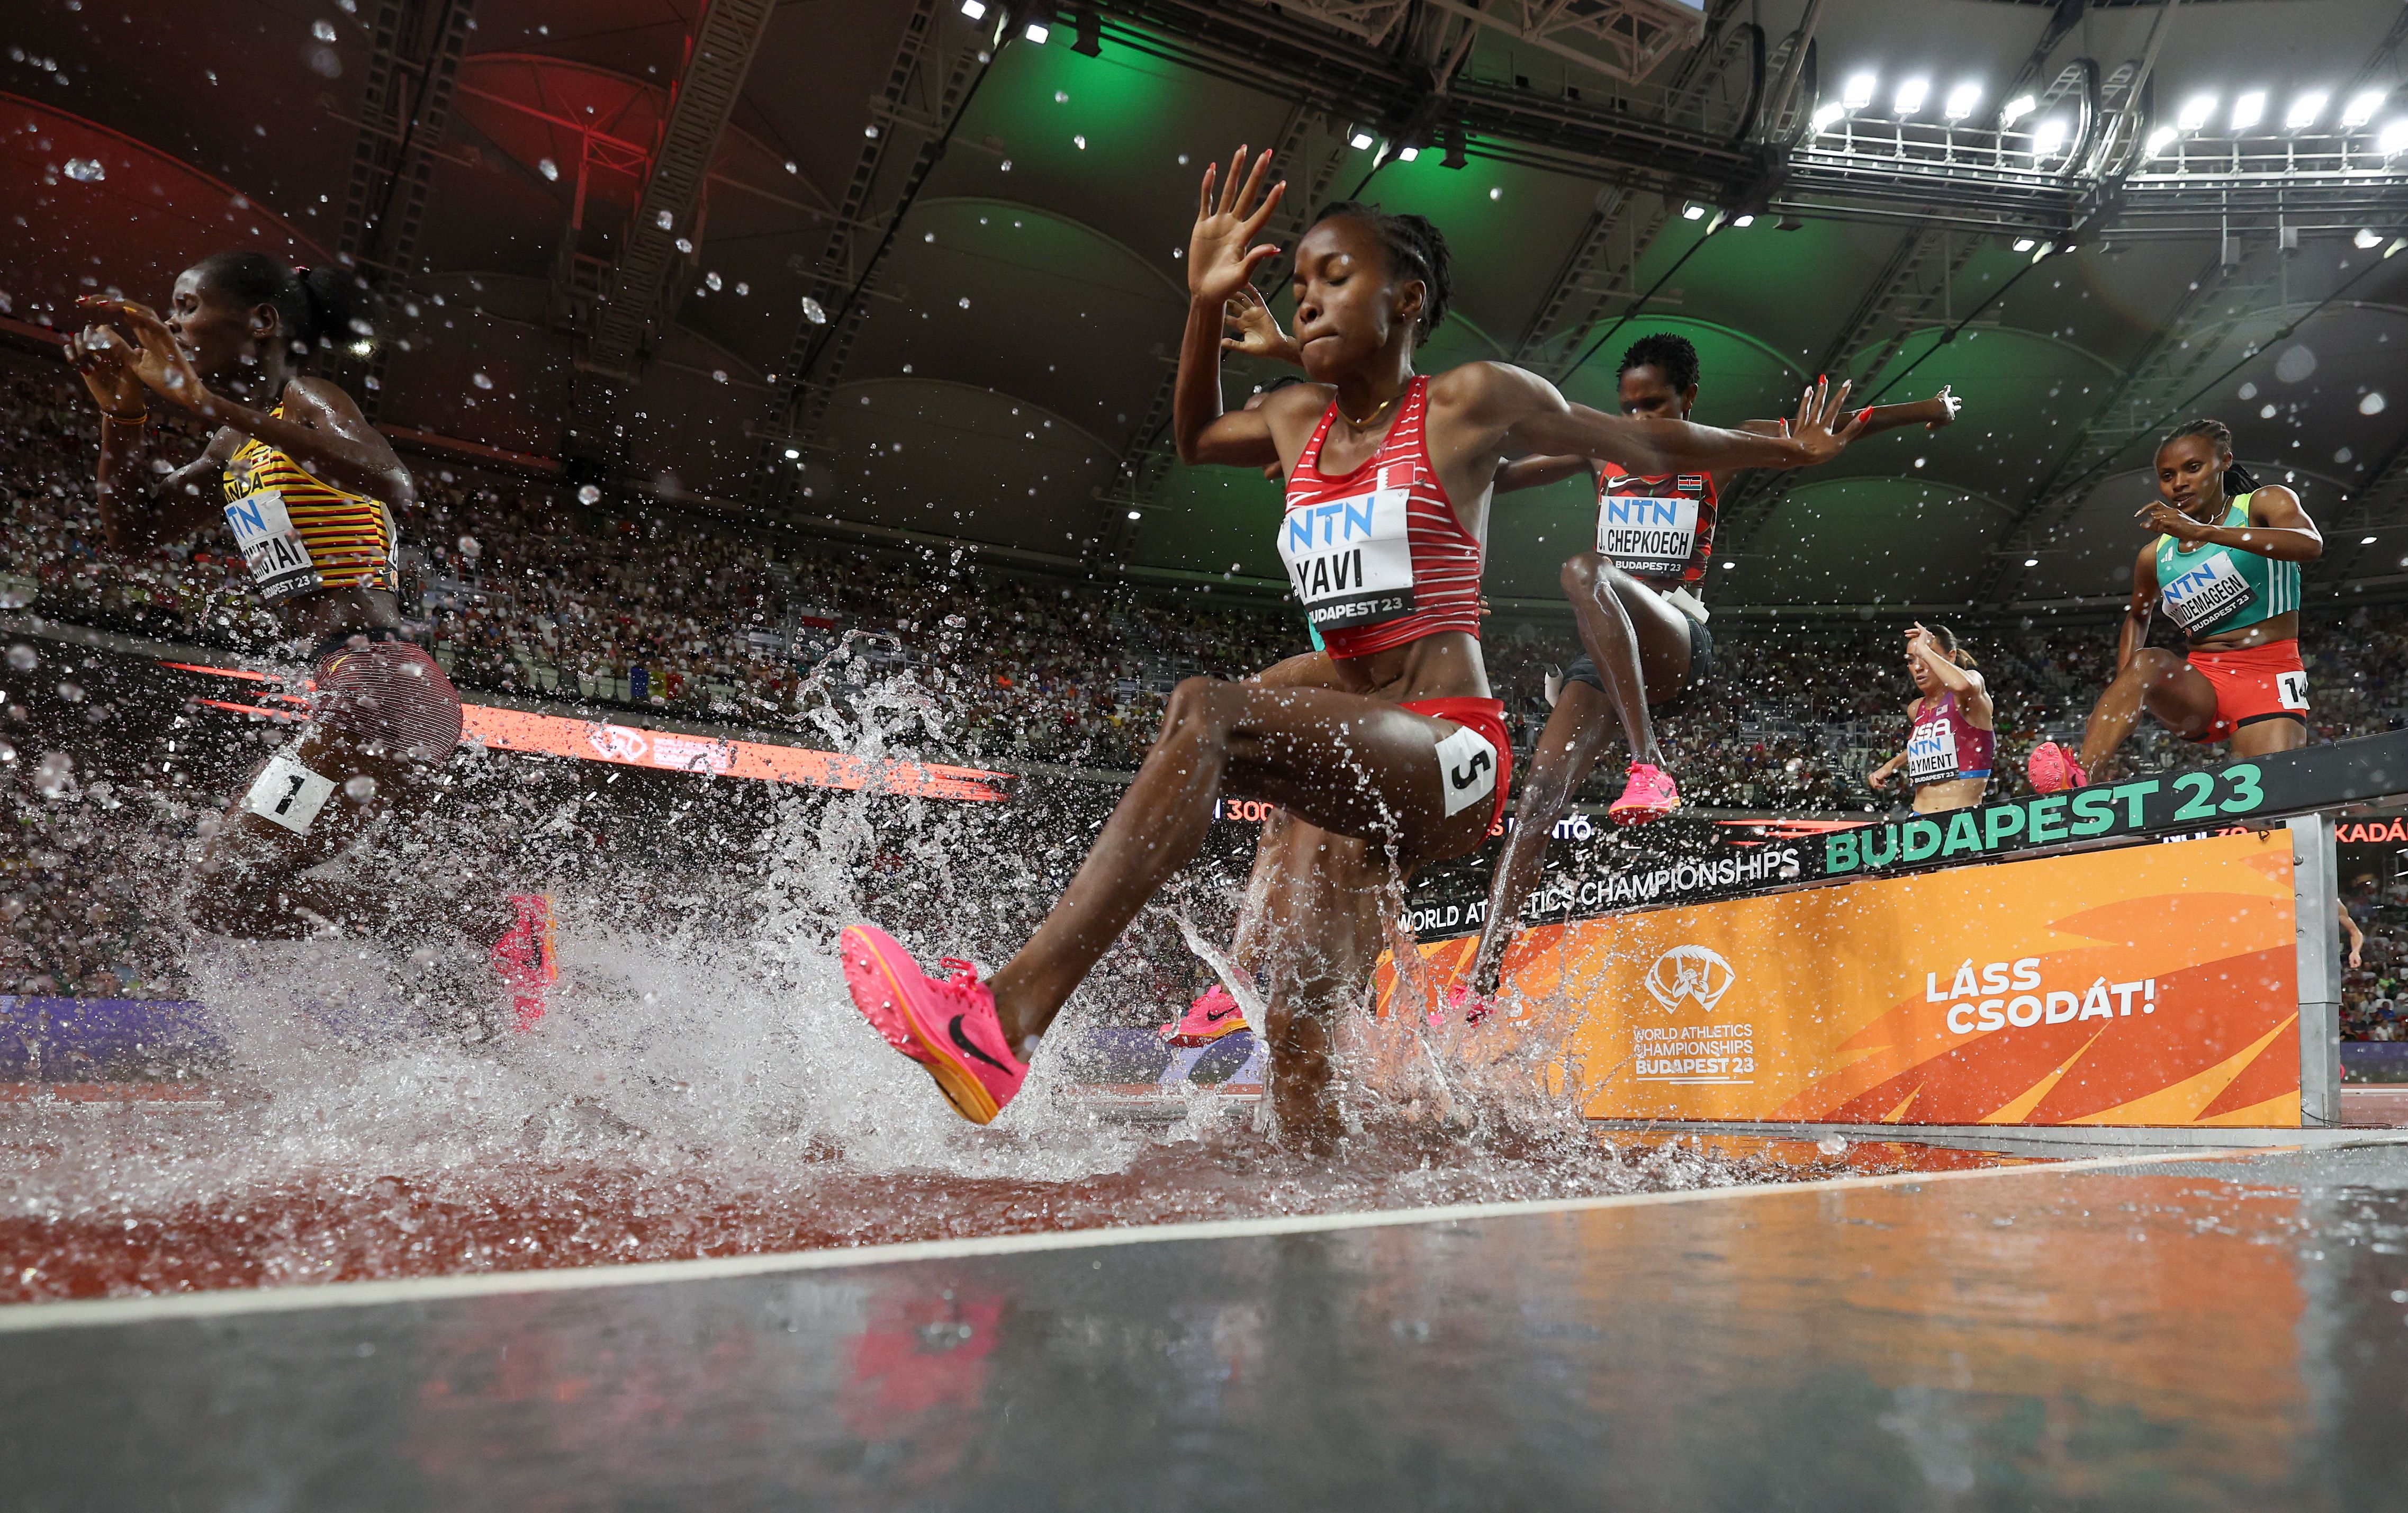 Winfred Mutile Yavi in the steeplechase at the World Athletics Championships Budapest 23